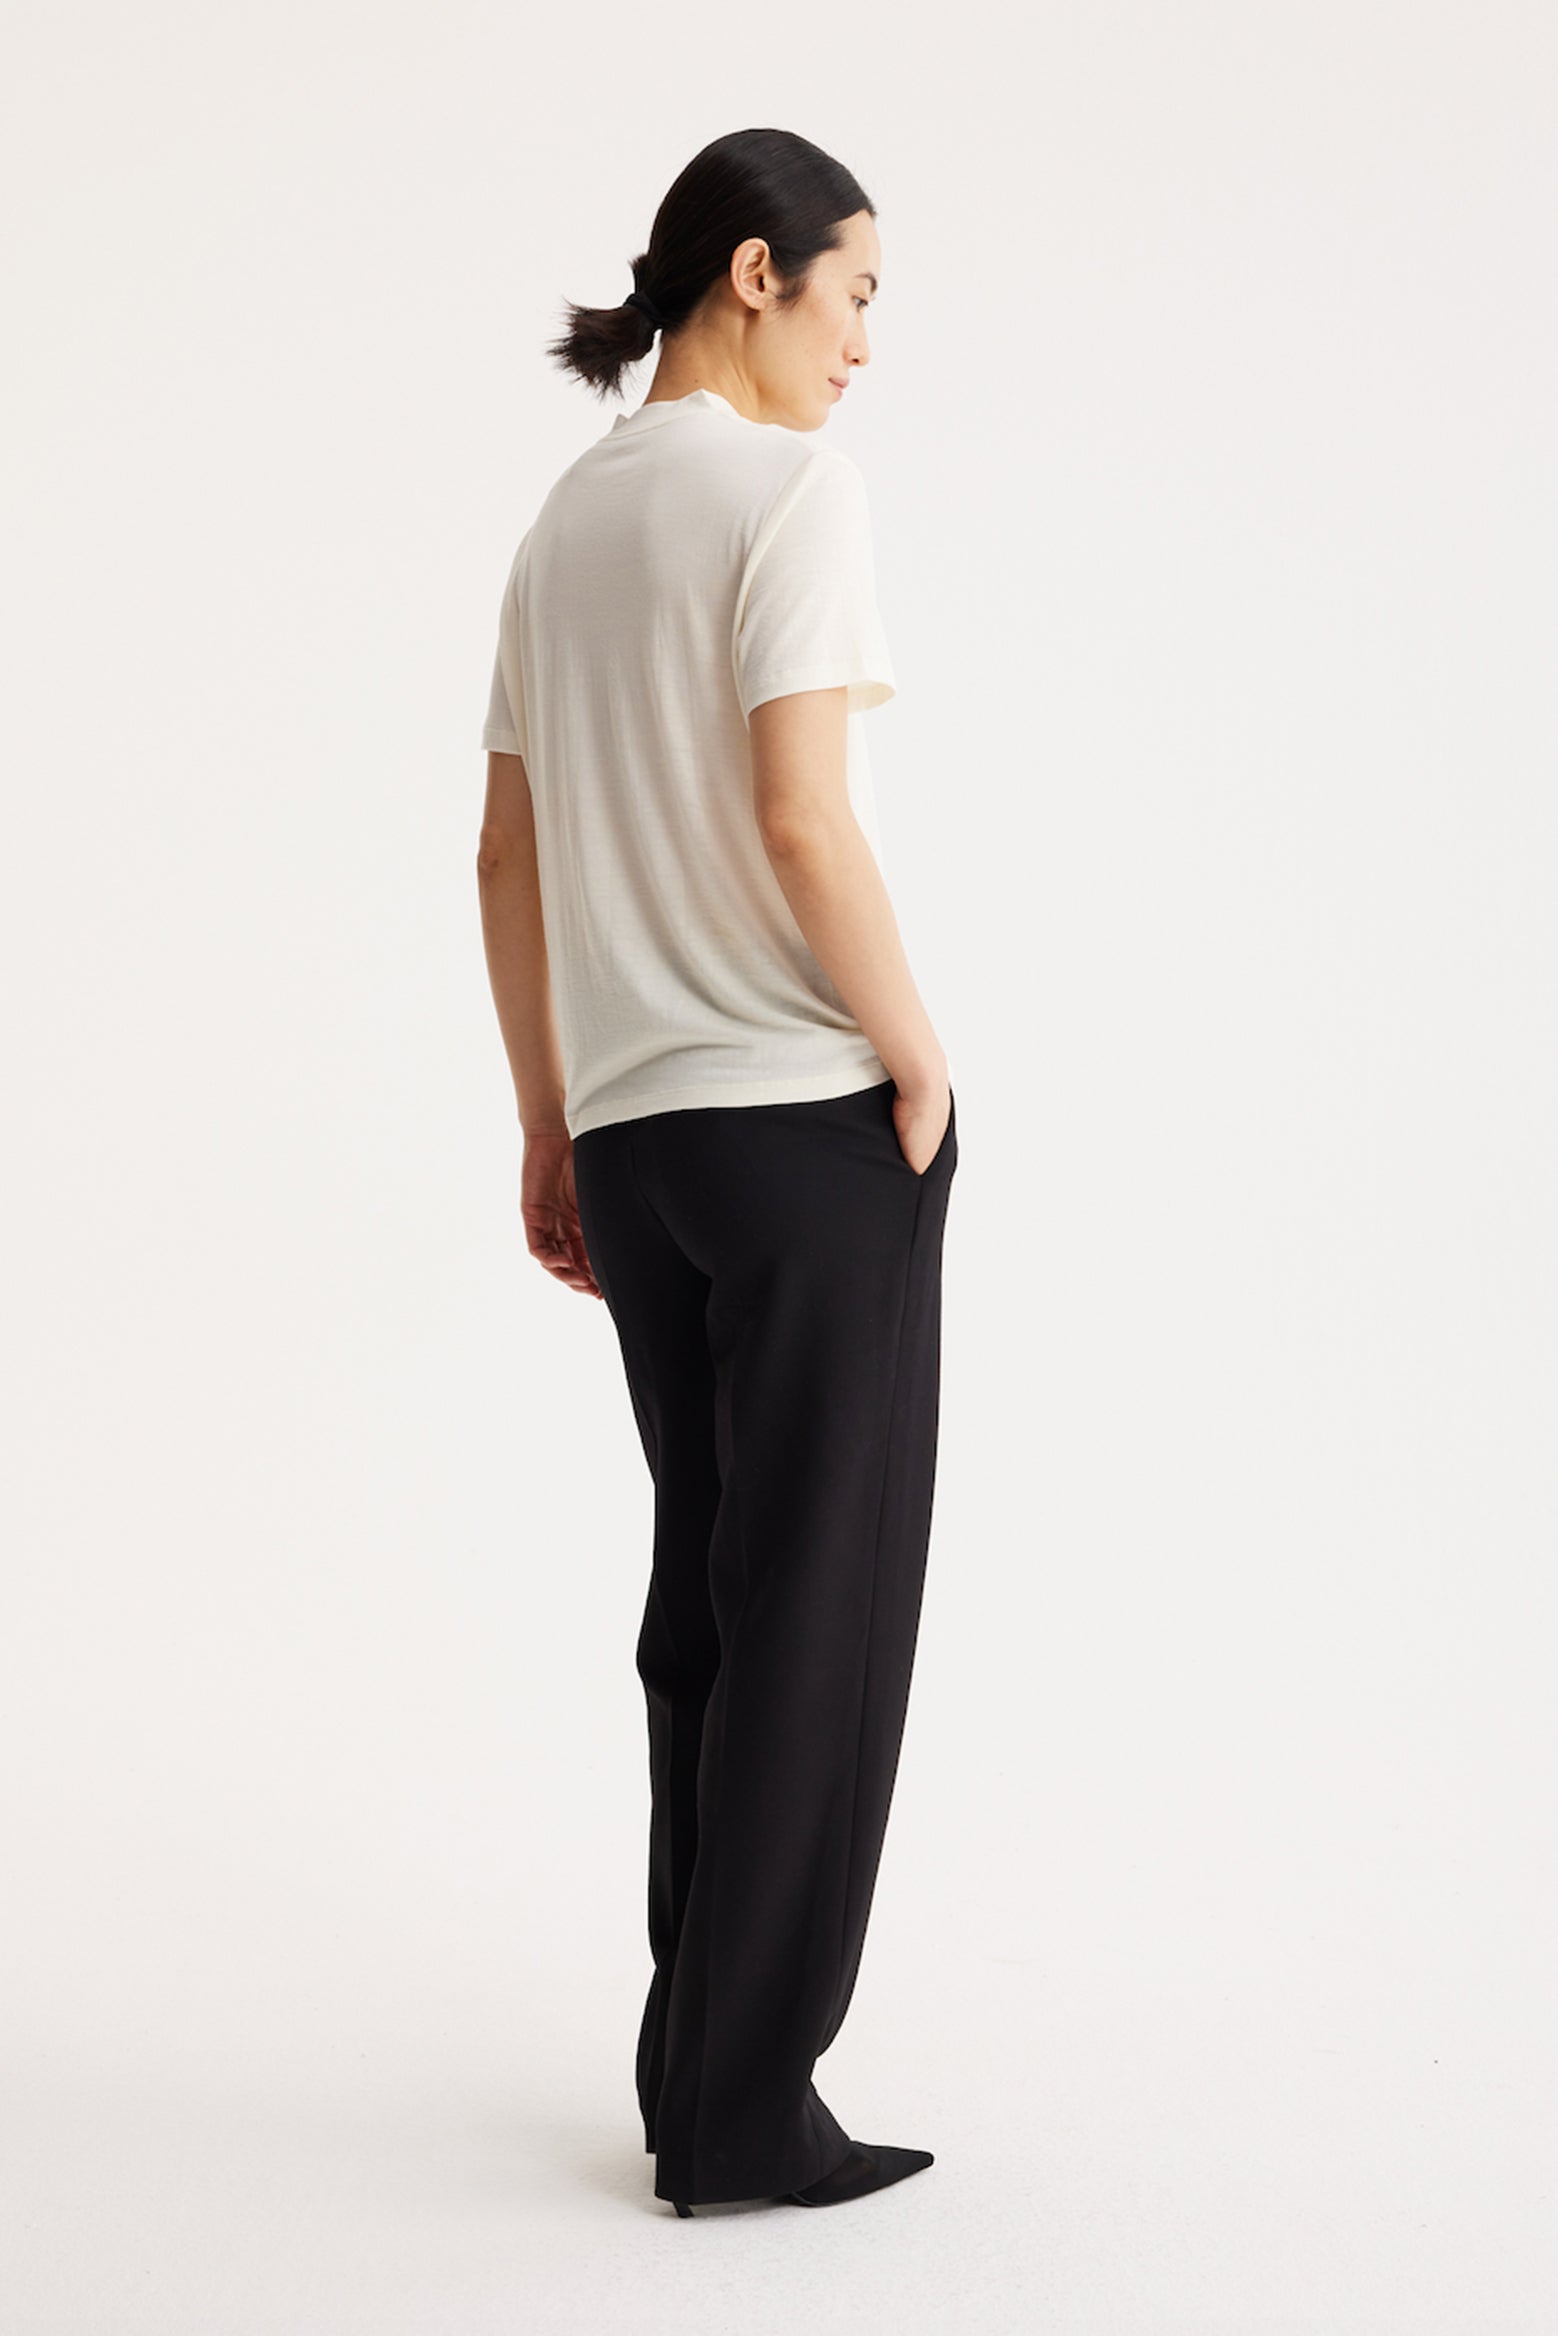 Rohe Summer Wool Jersey T-Shirt available at The New Trend Australia.